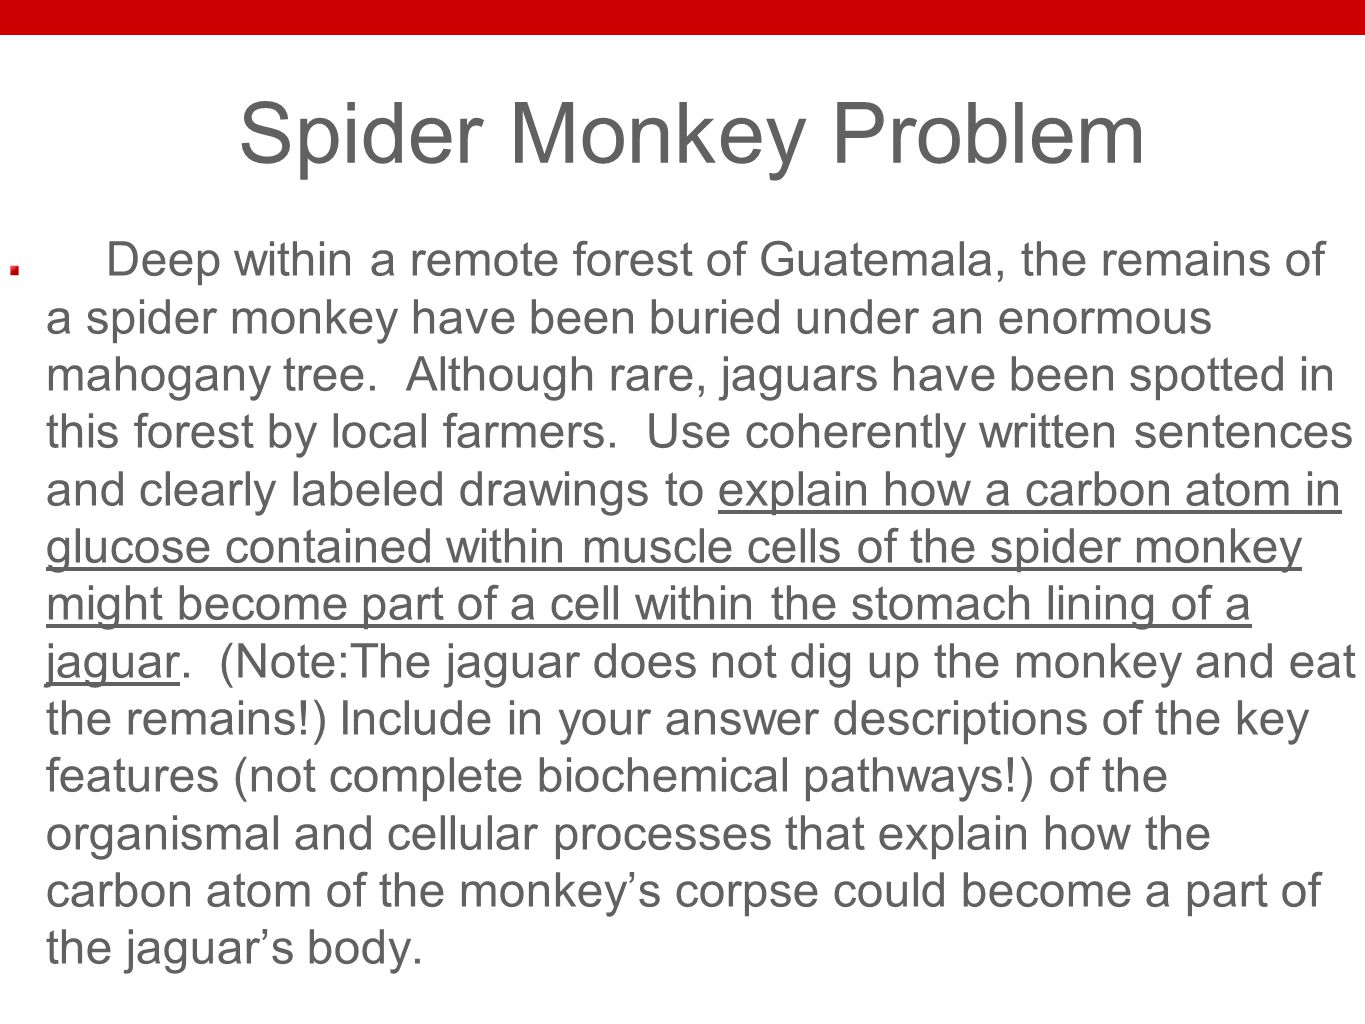 Spider Monkey Problem Deep within a remote forest of Guatemala, the remains of a spider monkey have been buried under an enormous mahogany tree.